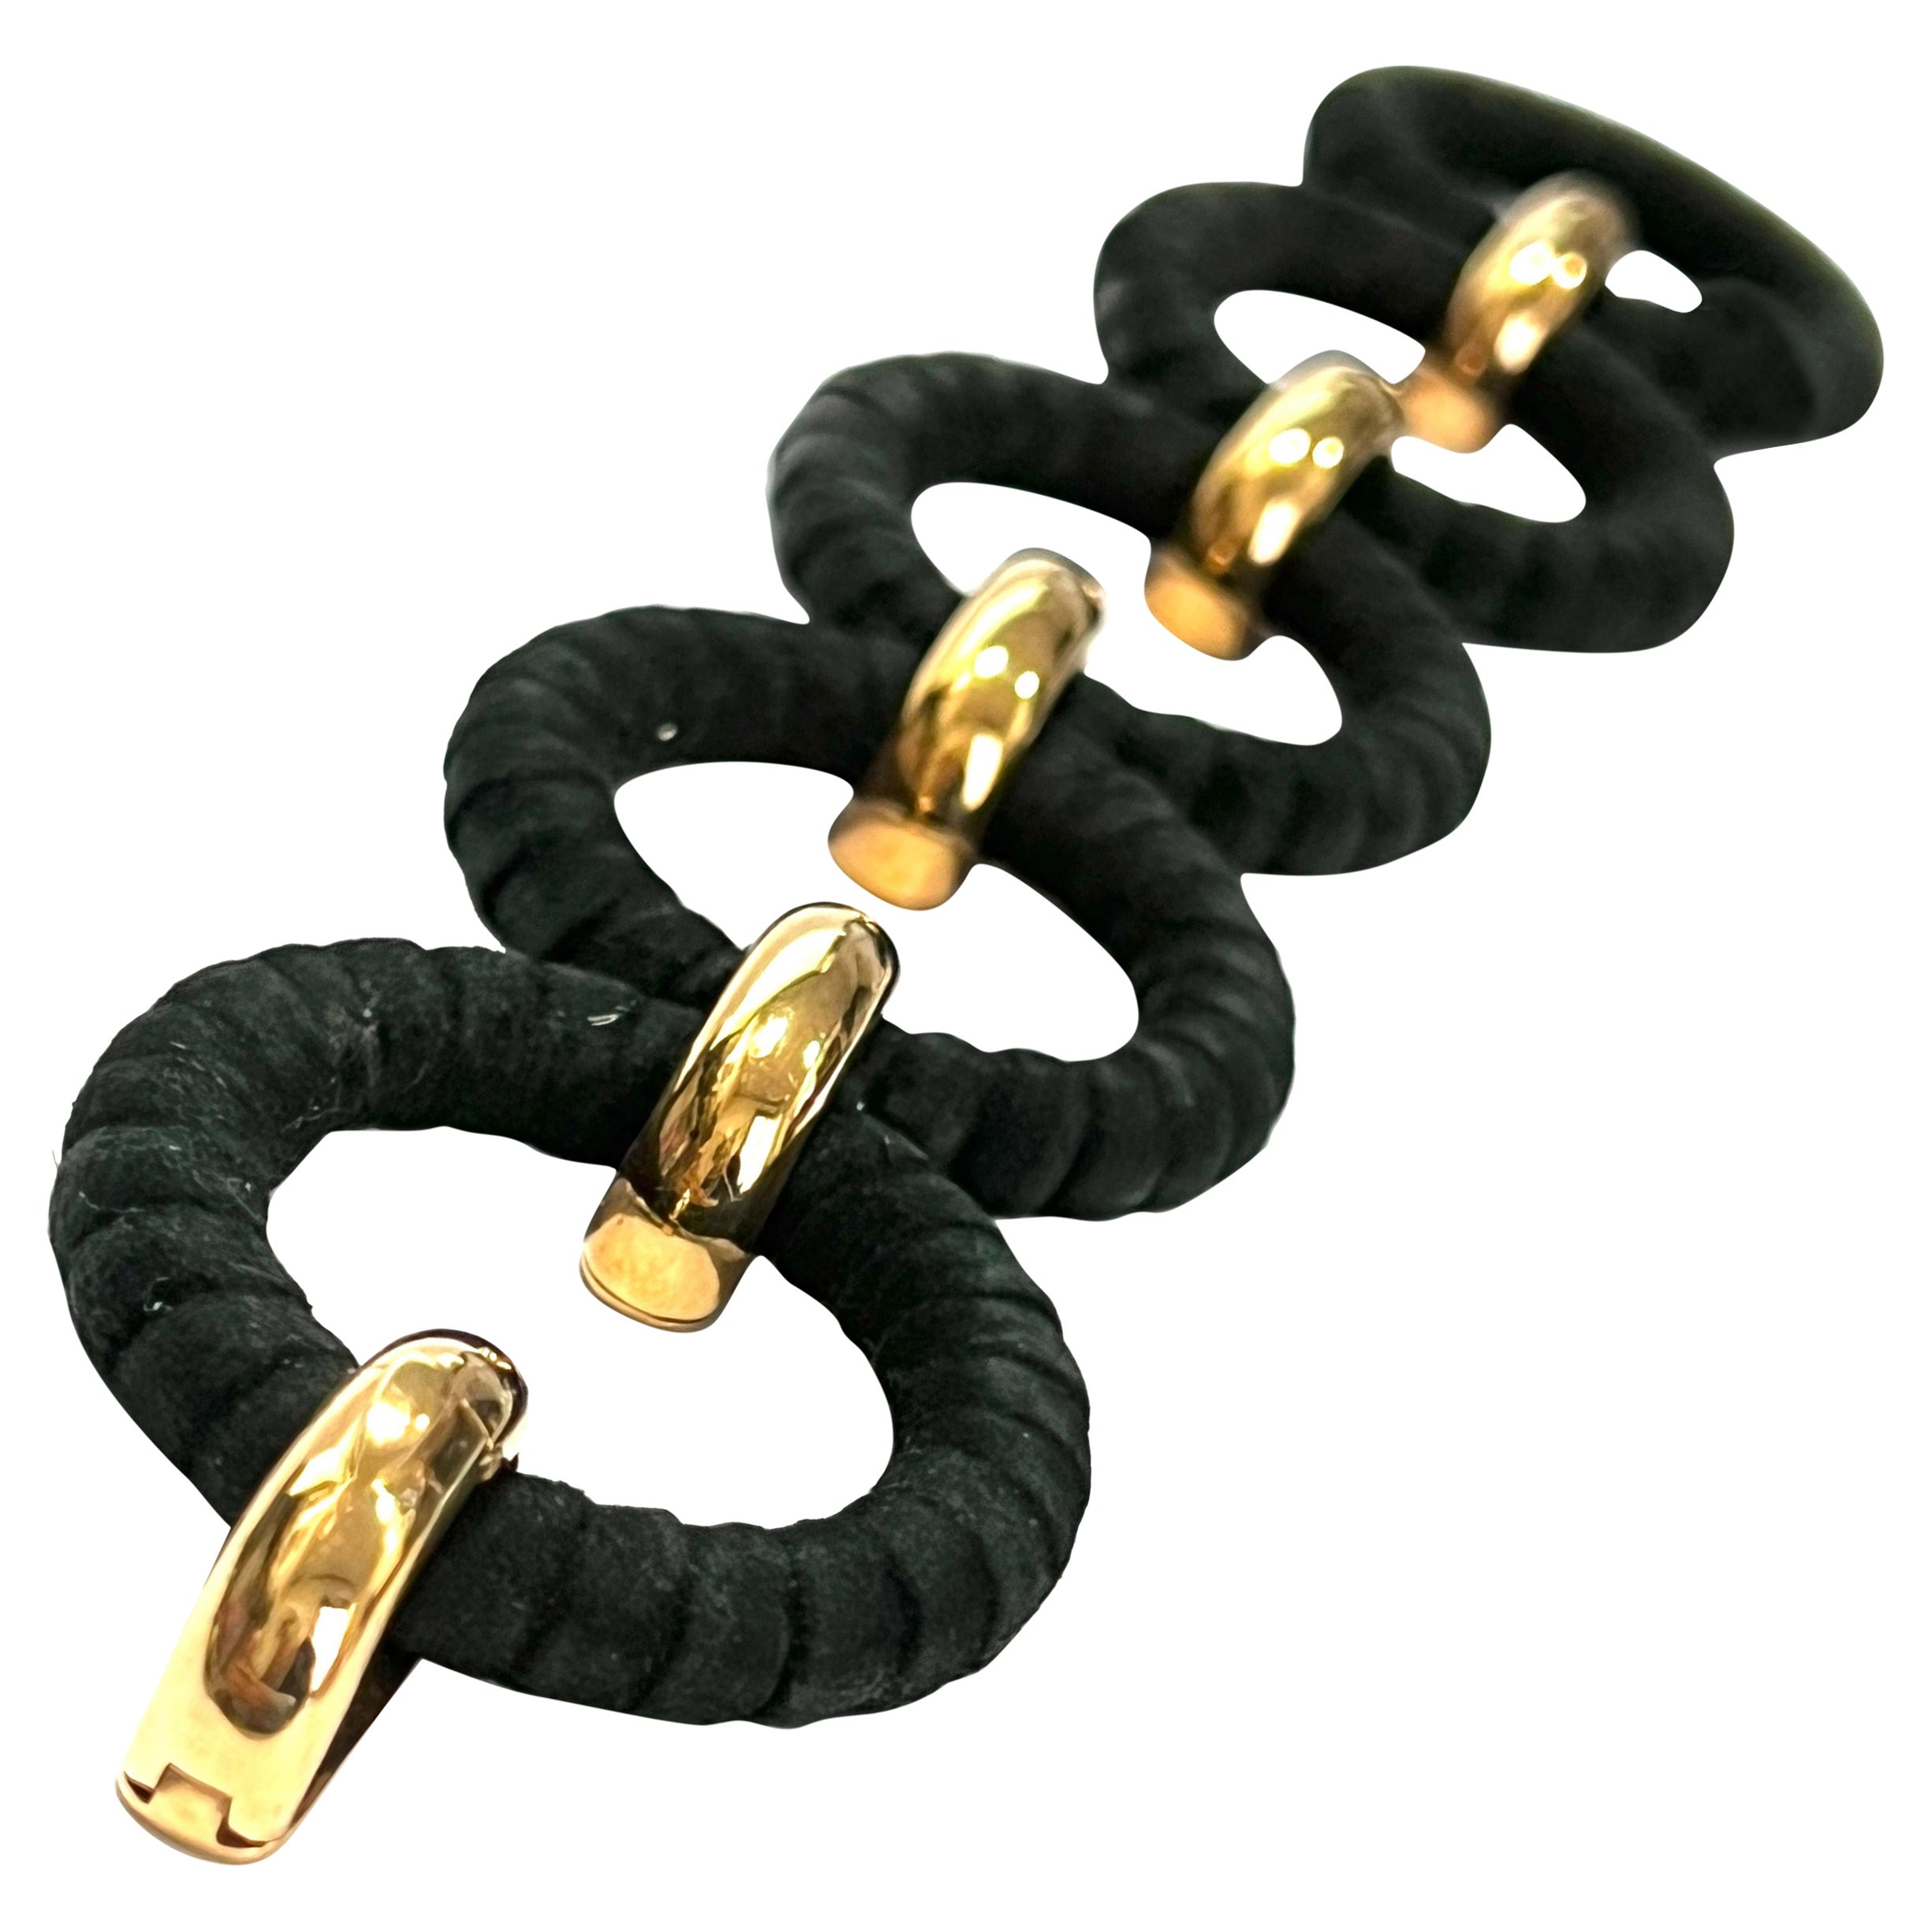 Bracelet with Round Black Leather Links Combined with 18k Rose Gold Links For Sale